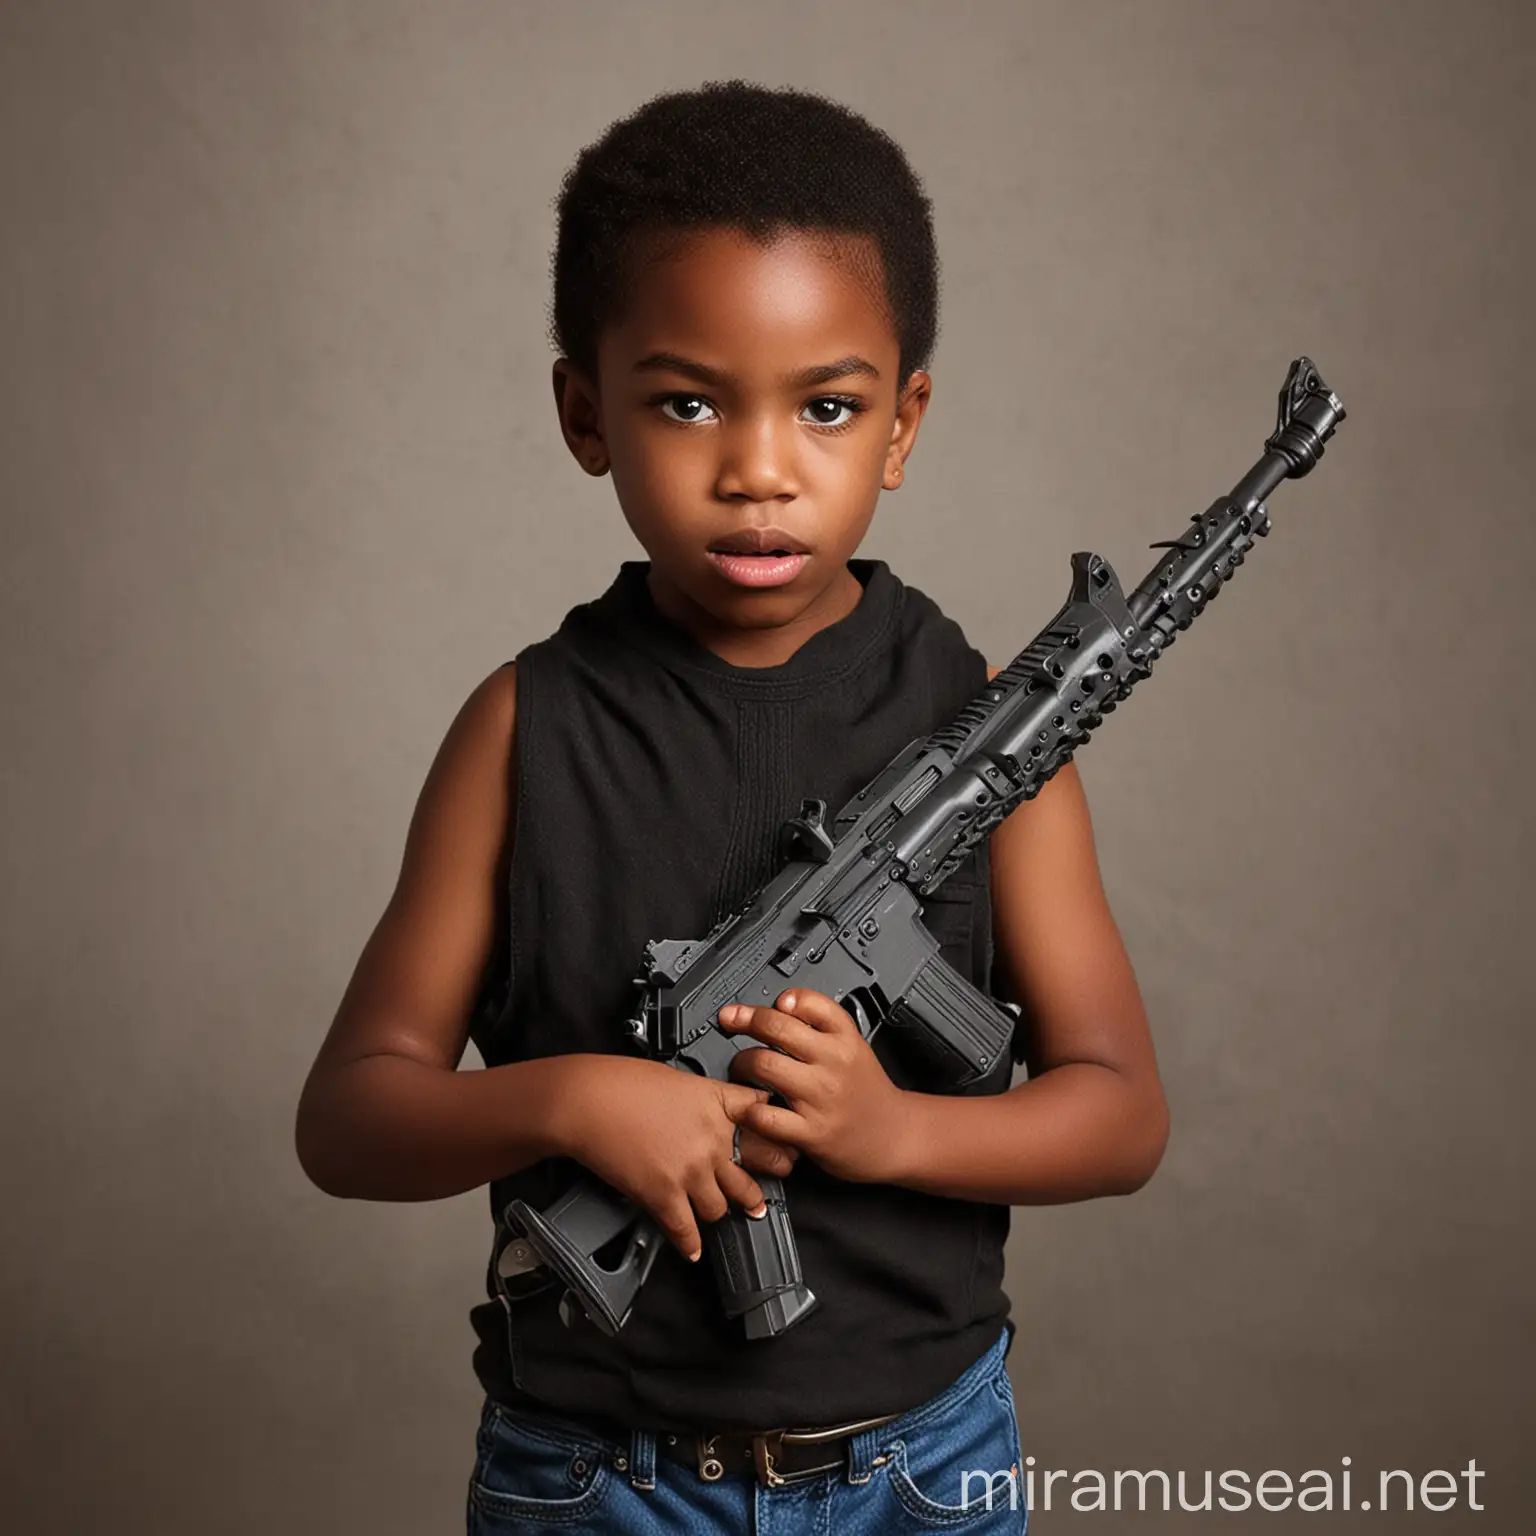 African American Children Playing with Toy Guns in Urban Setting